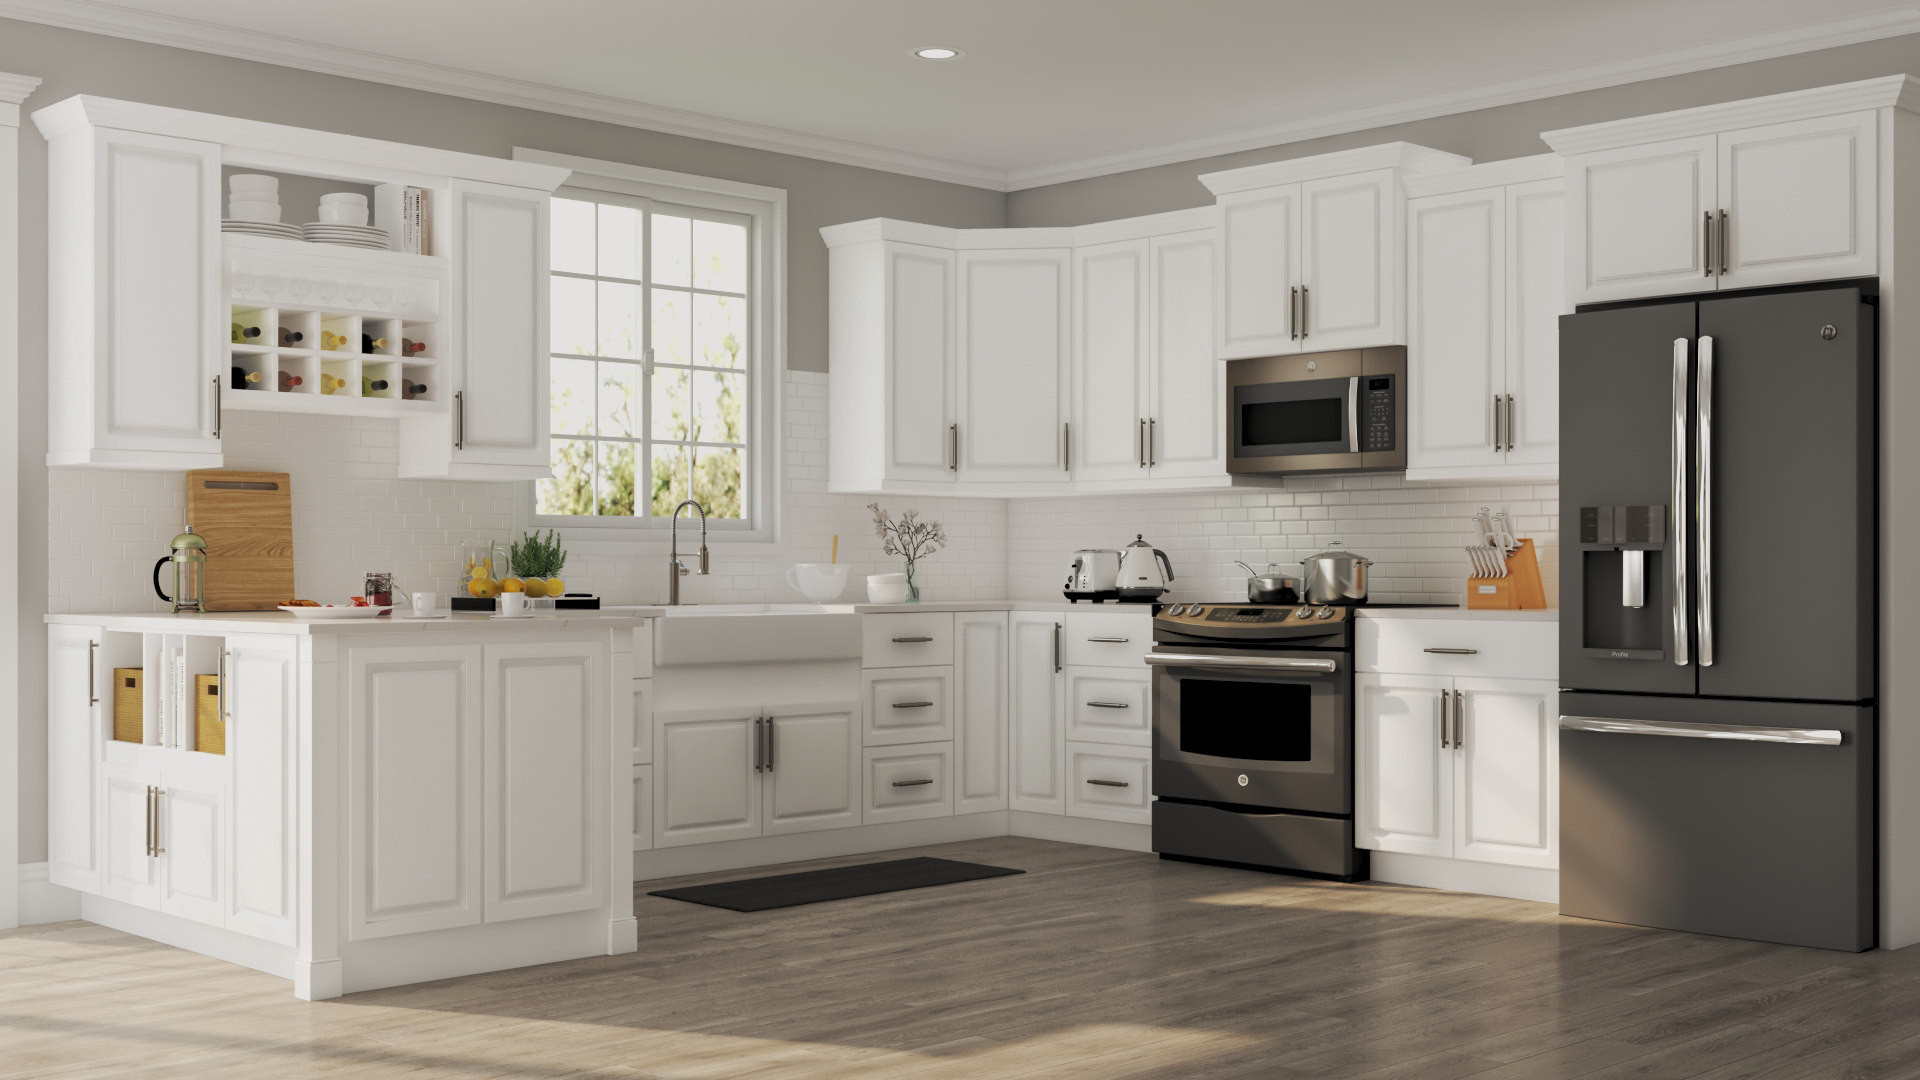 Wall Cabinet Kitchen
 Hampton Wall Cabinets in White – Kitchen – The Home Depot